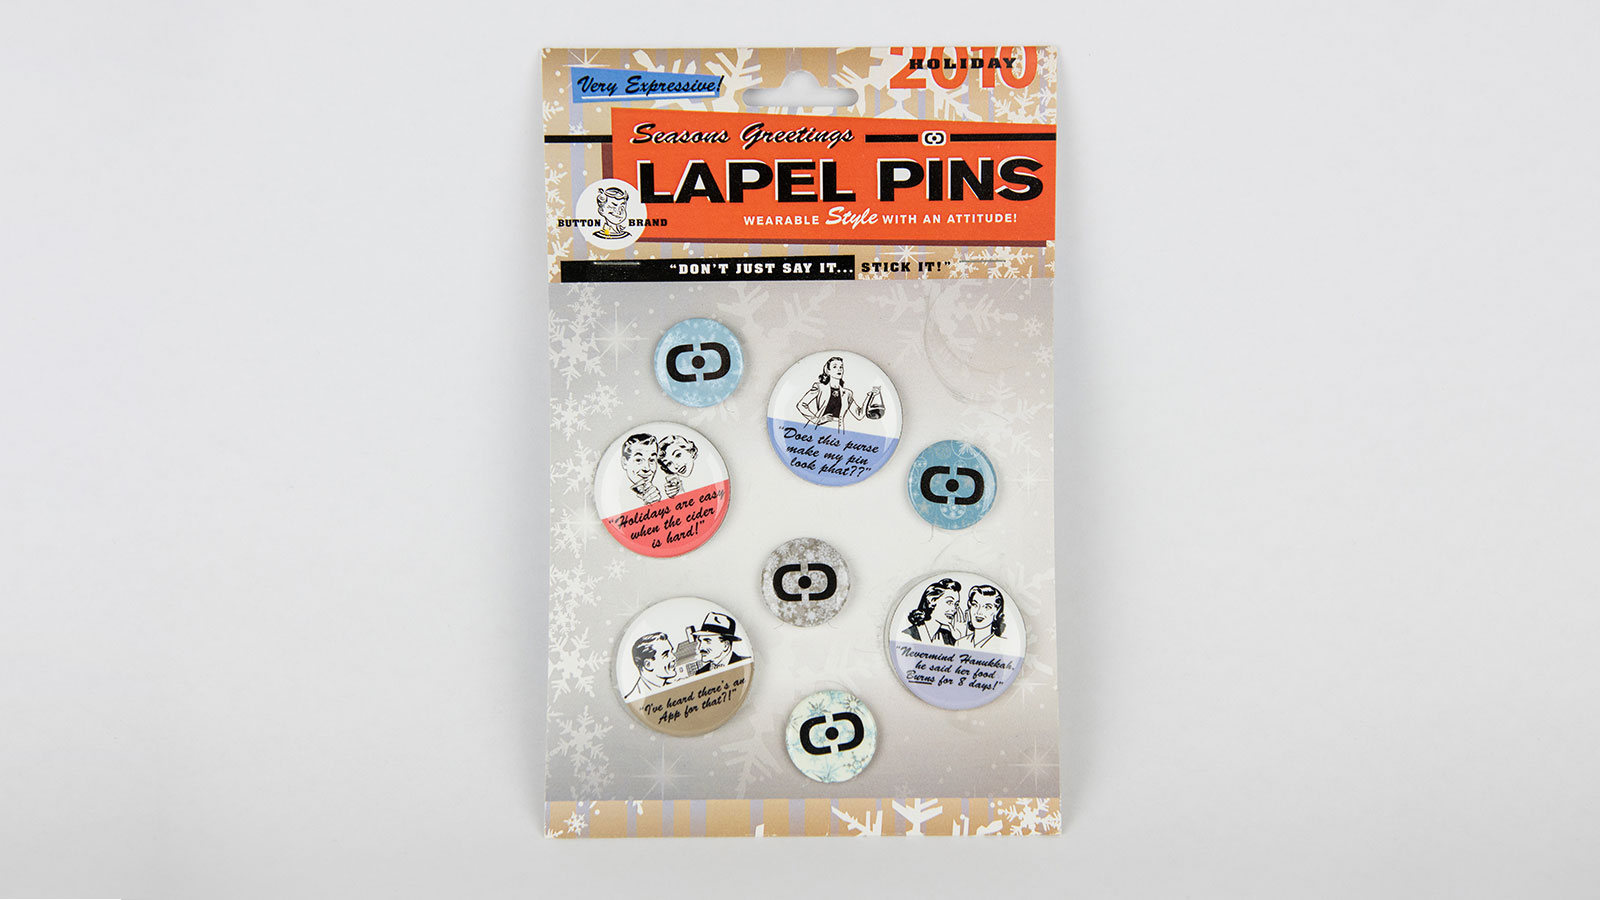 Holiday Lapel Pin Promotion – Full Design